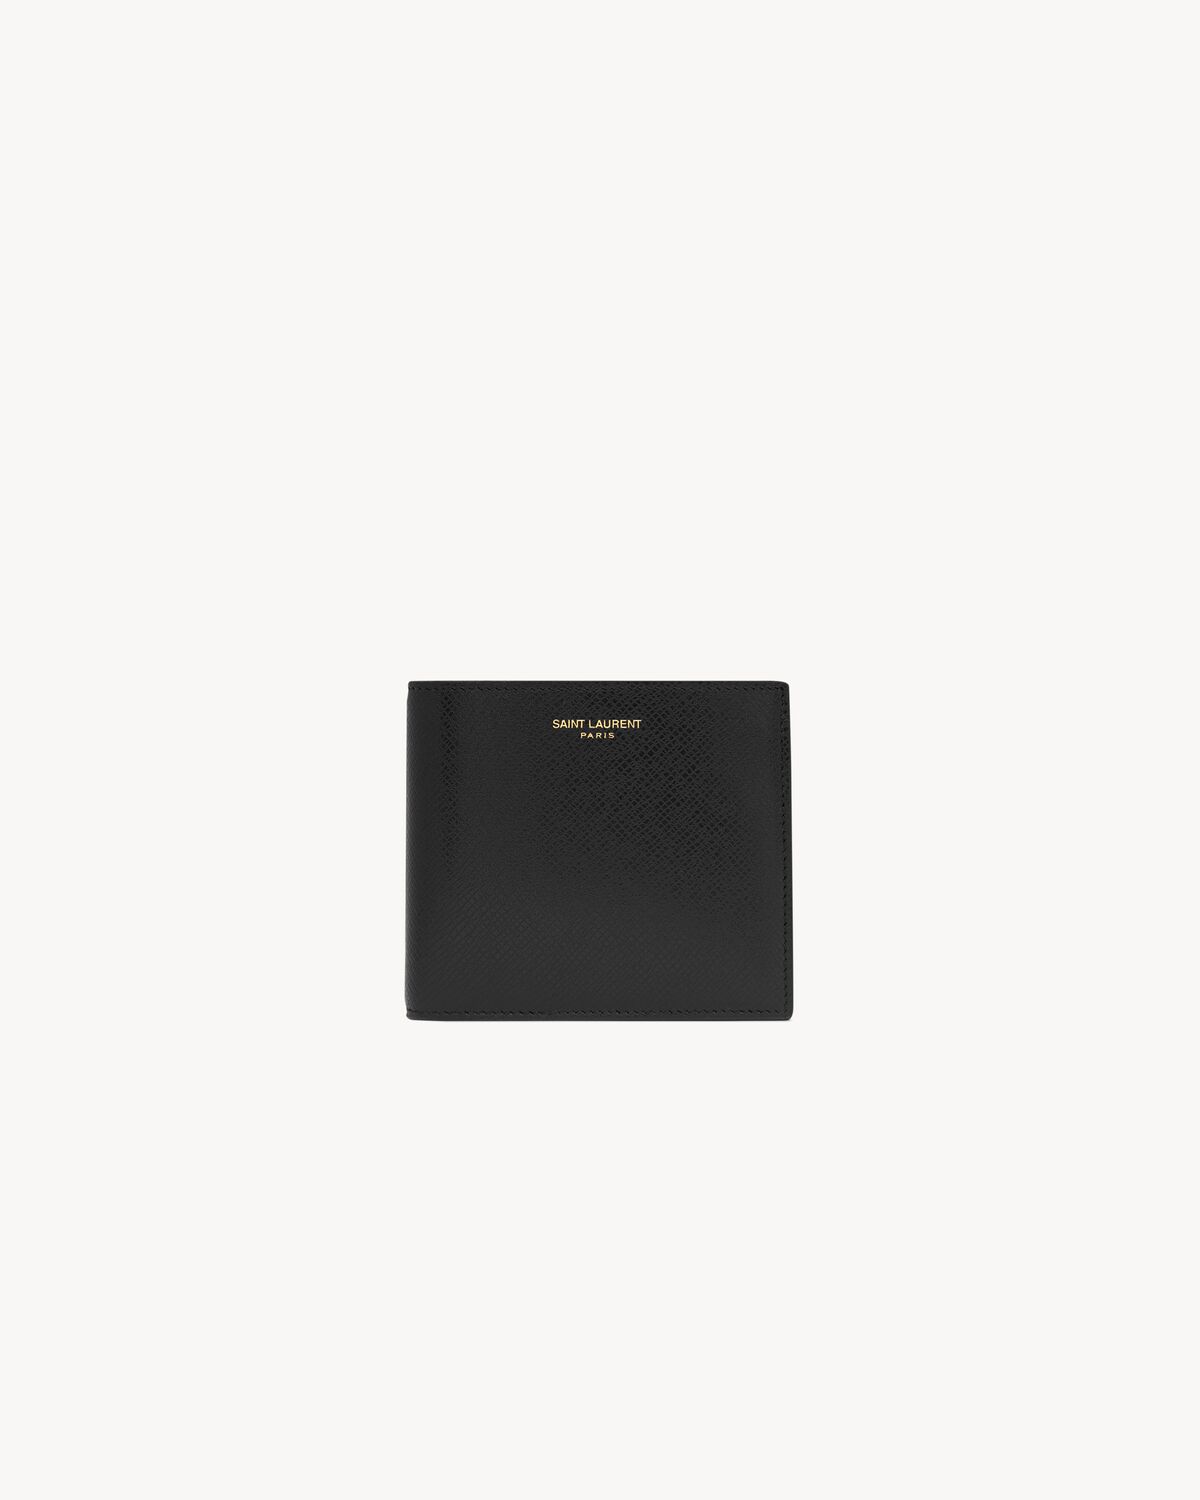 Saint Laurent Paris EAST/WEST wallet with coin purse in coated bark leather